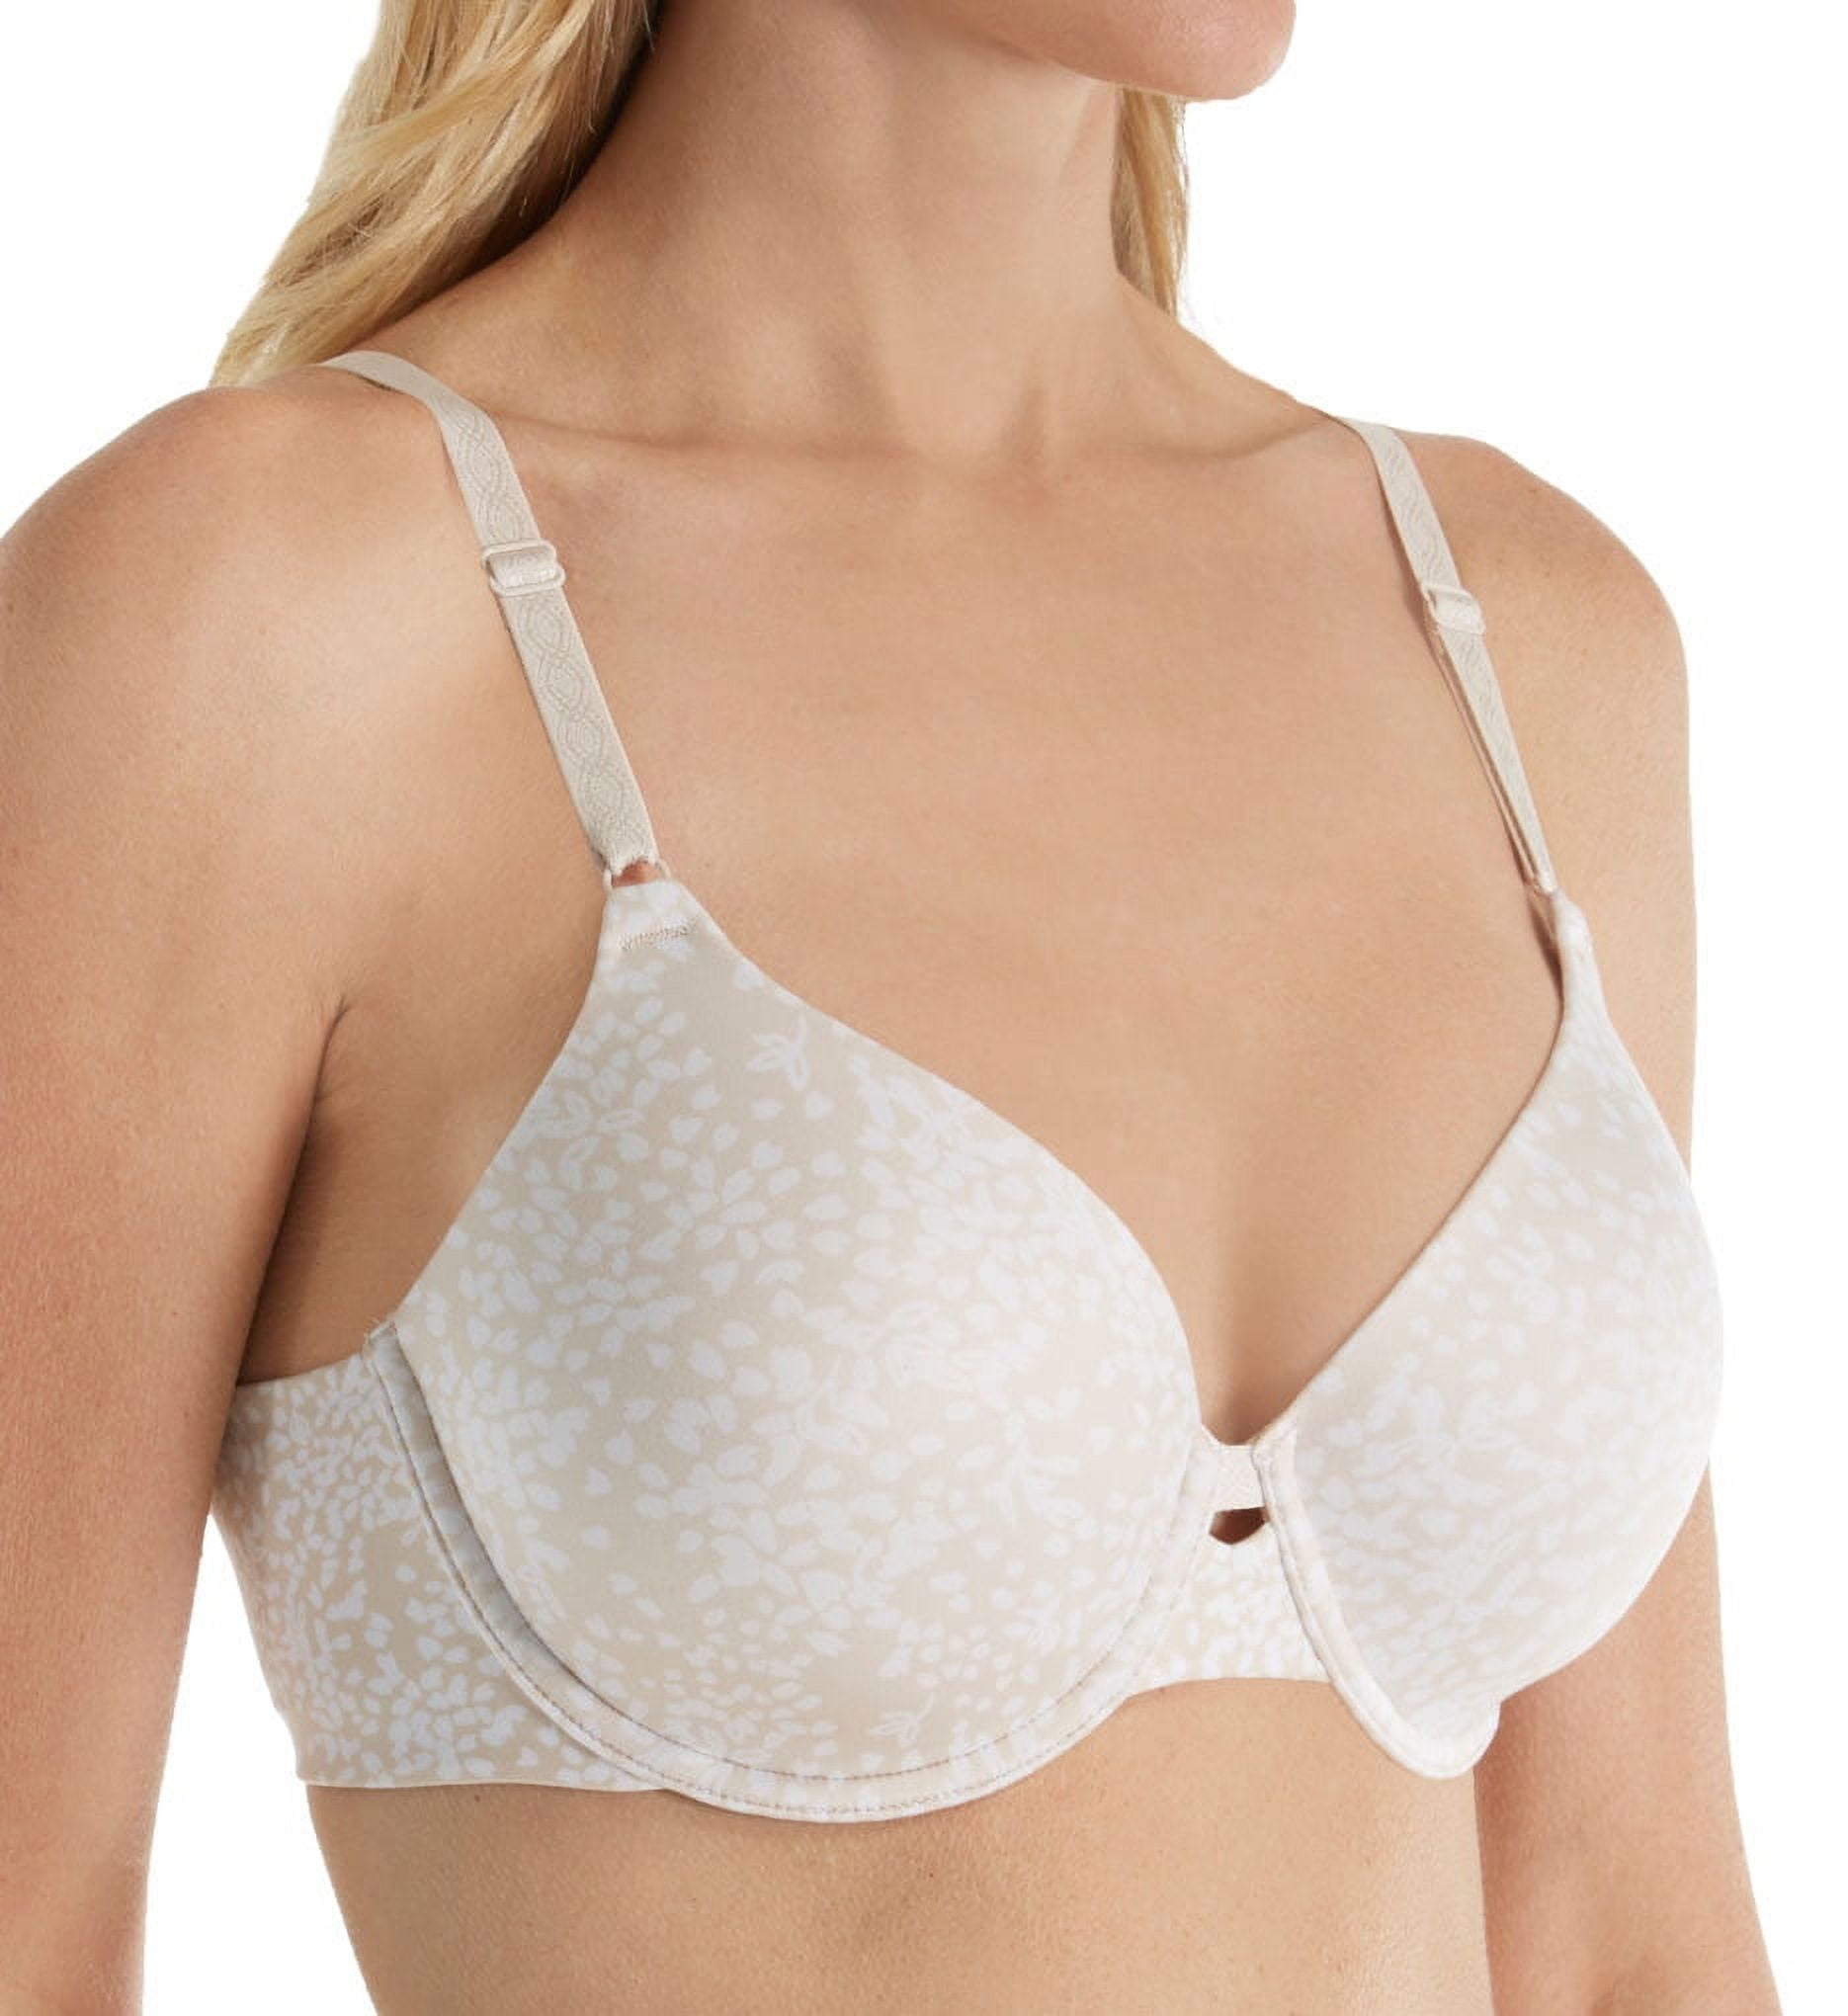 Women's Warner's RB1691A Cloud 9 Underwire Contour Bra (Toasted